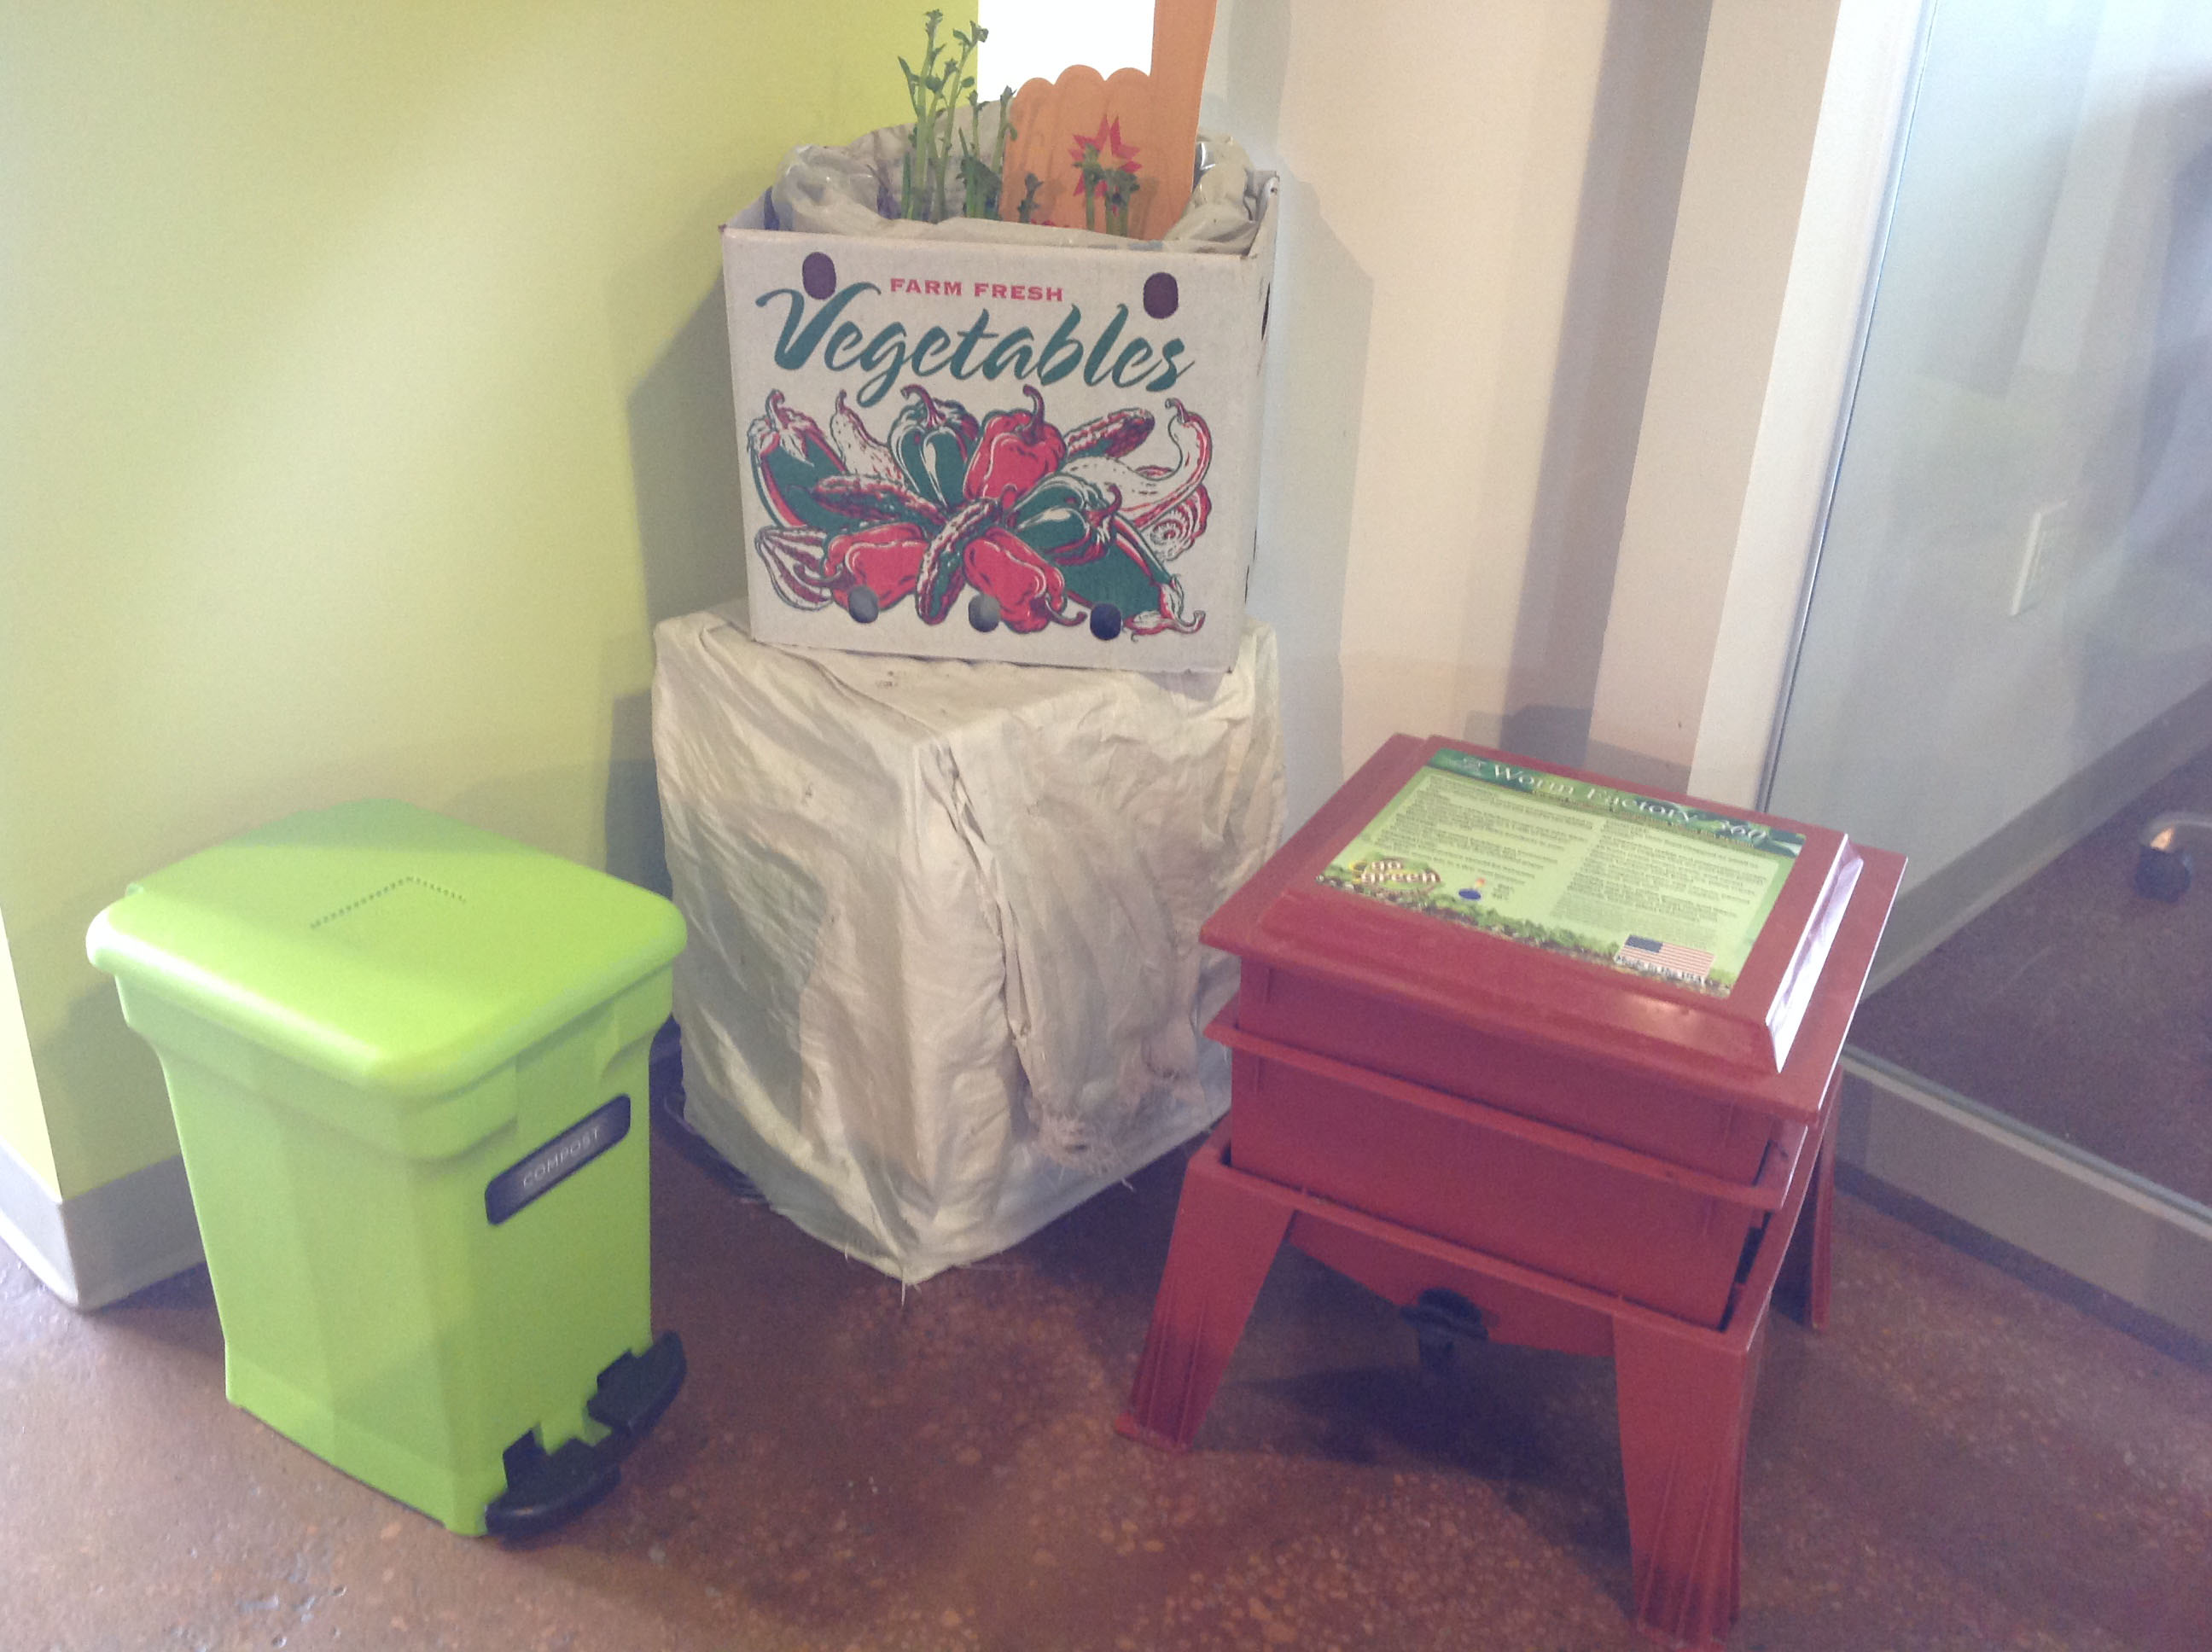 Our office composting system